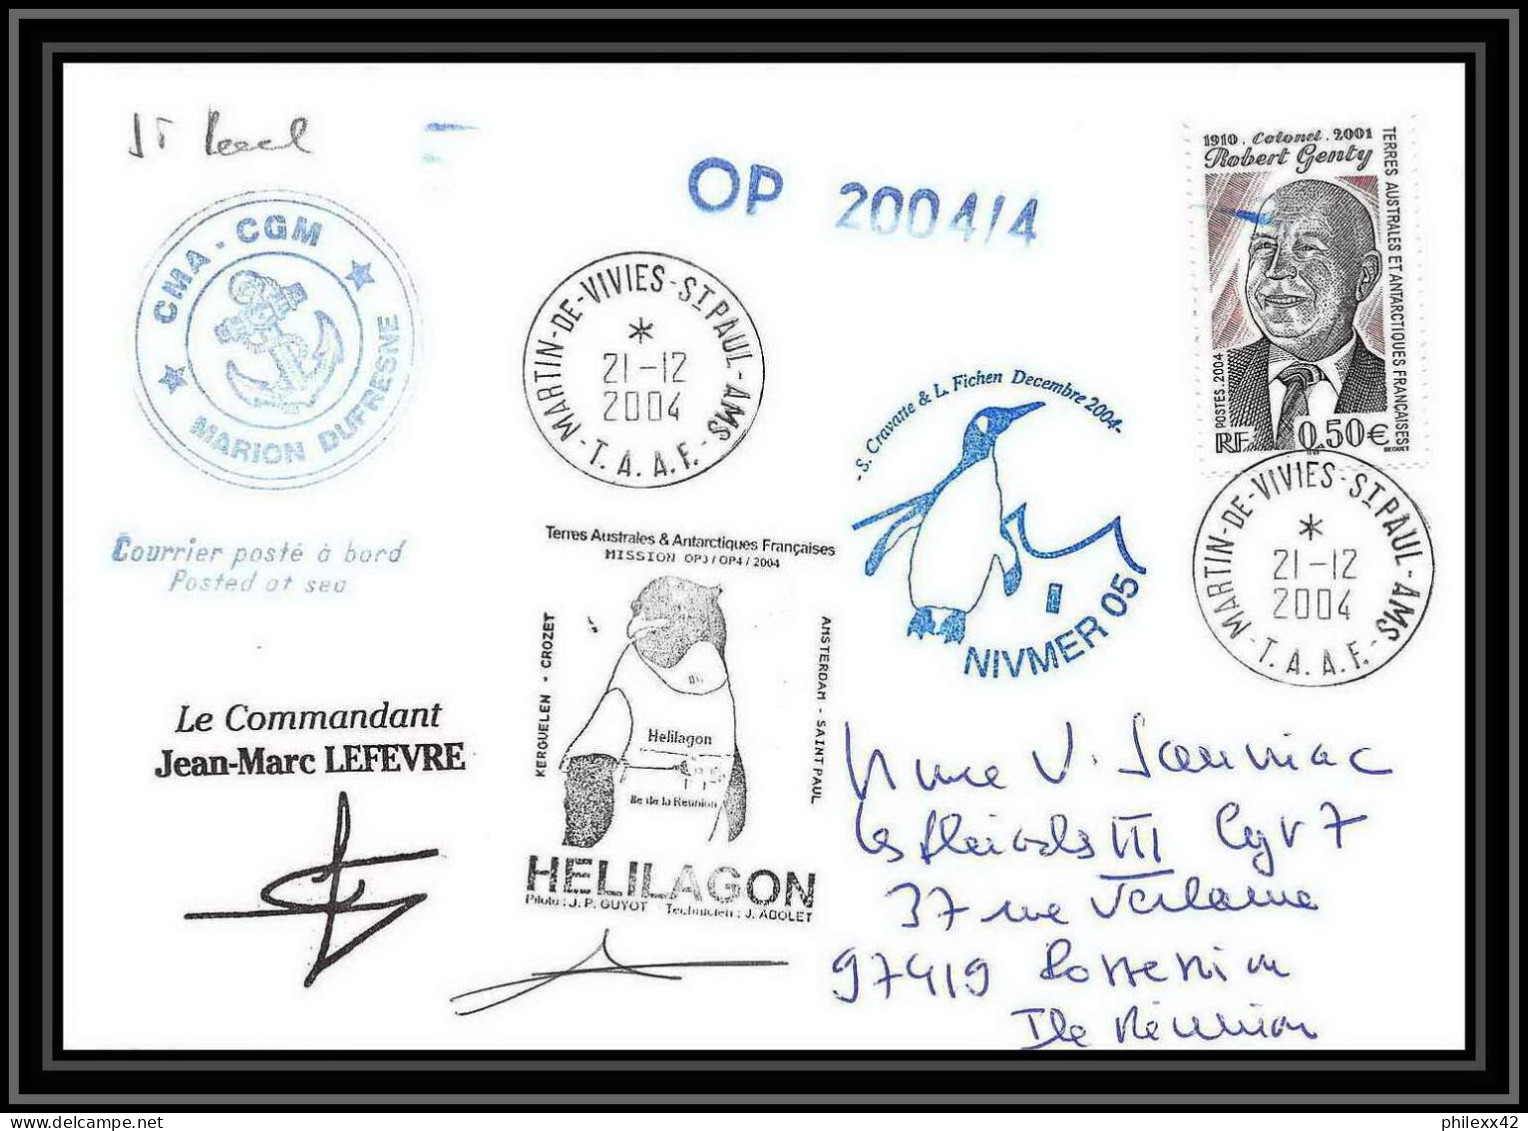 2480 ANTARCTIC Terres Australes TAAF Lettre Cover Dufresne 2 Signé Signed OP 2004/4 N°392 21/12/2004 Helilagon - Helicopters